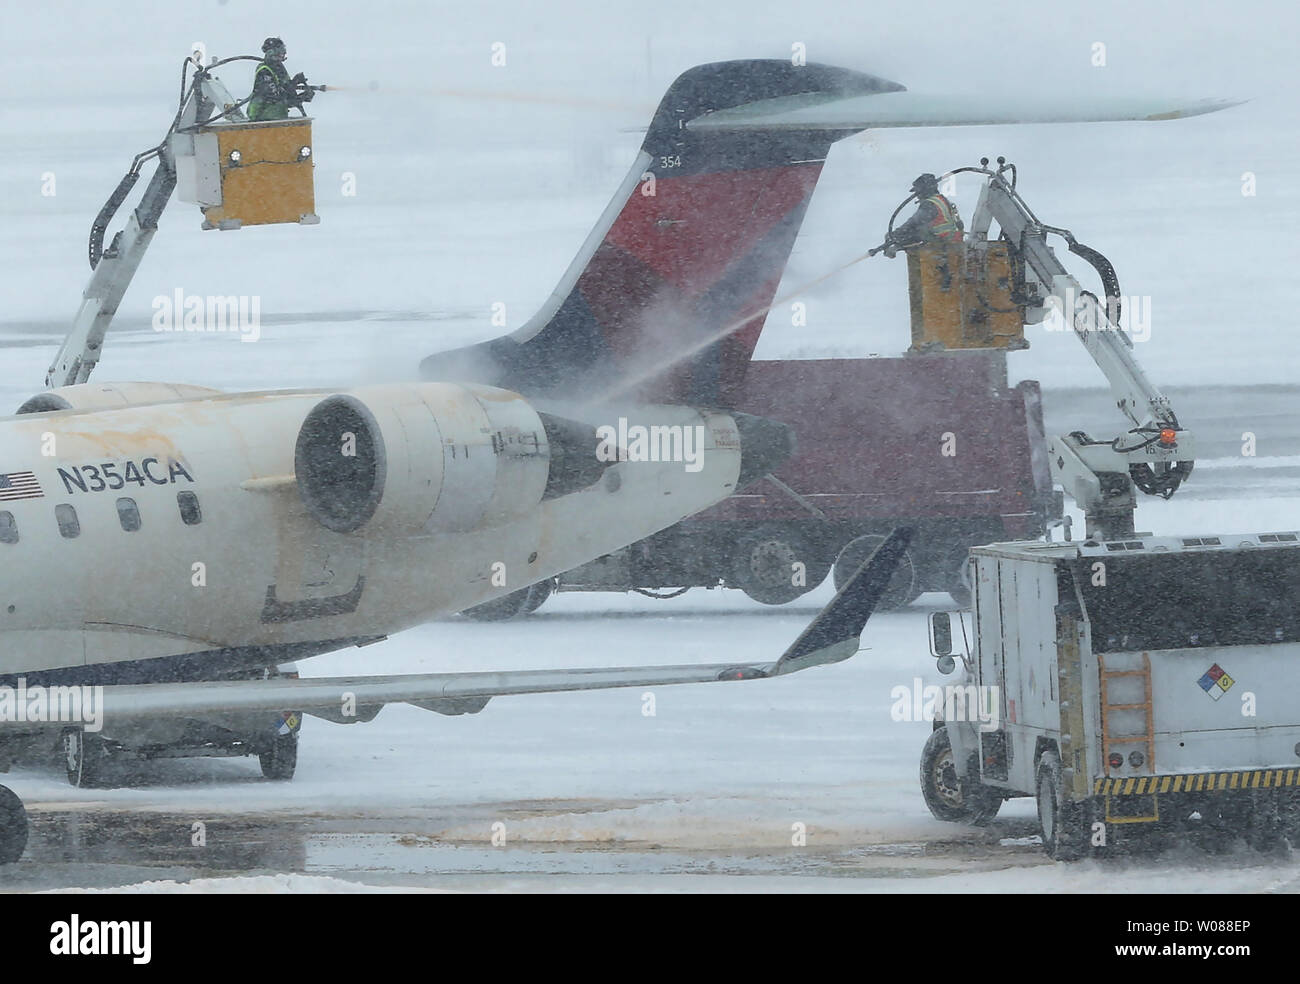 A plane is sprayed with de-icing fluid before take off during a heavy snow storm at St. Louis-Lambert International Airport in St. Louis on March 3, 2019. The morning storm dumped 2-3 inches on the area. Photo by Bill Greenblatt/UPI Stock Photo